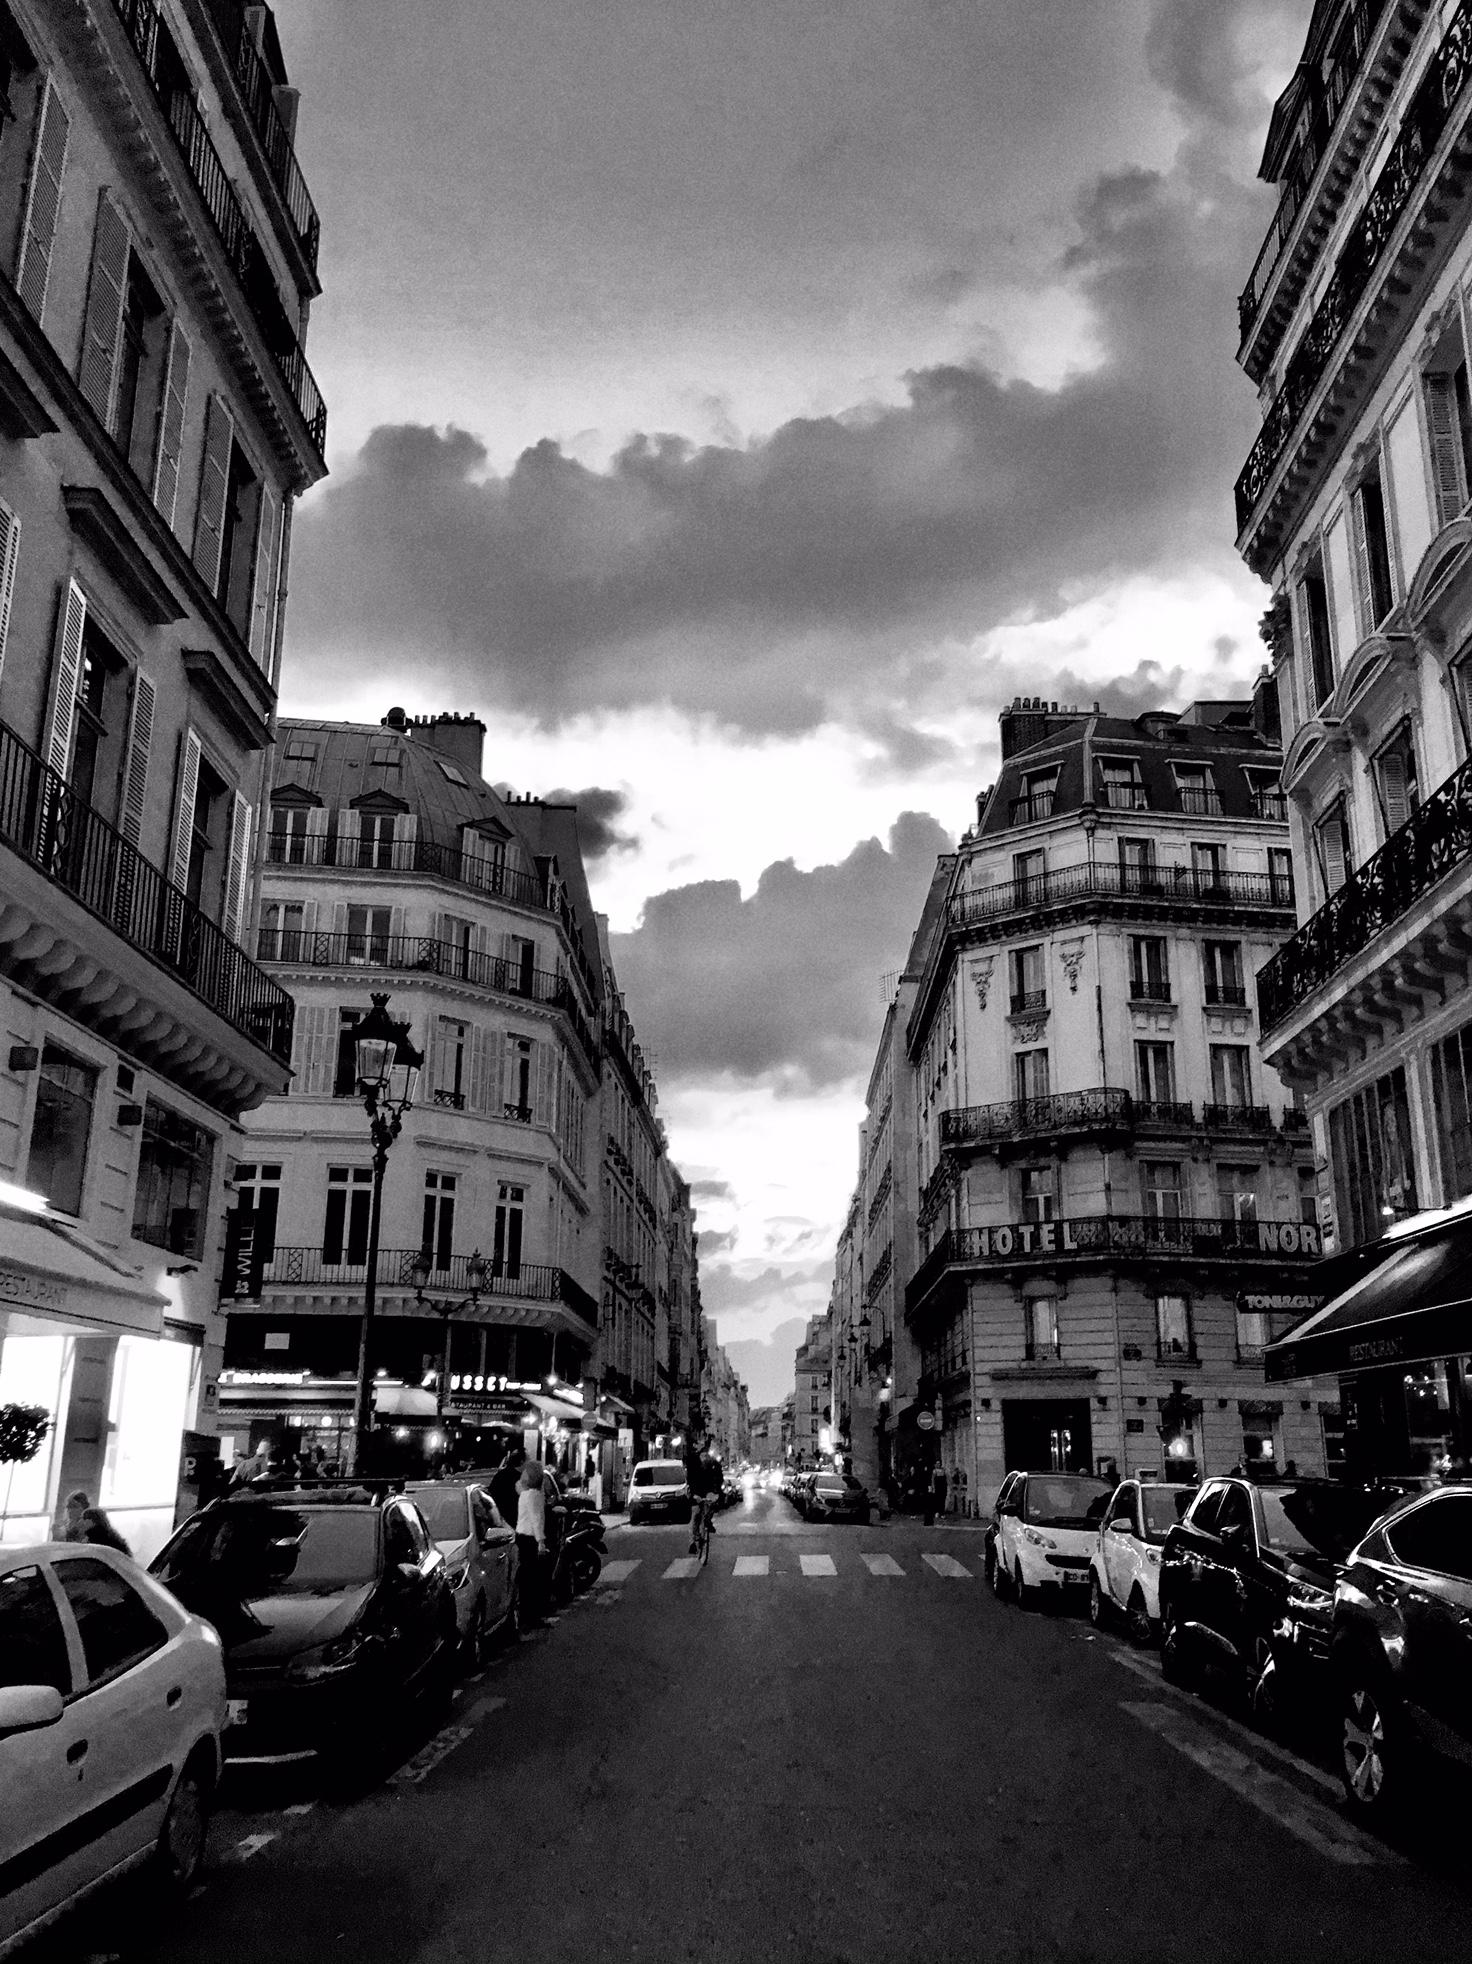 #InTheSky A Weekend in Paris #1 - Photograph by James Bacchi